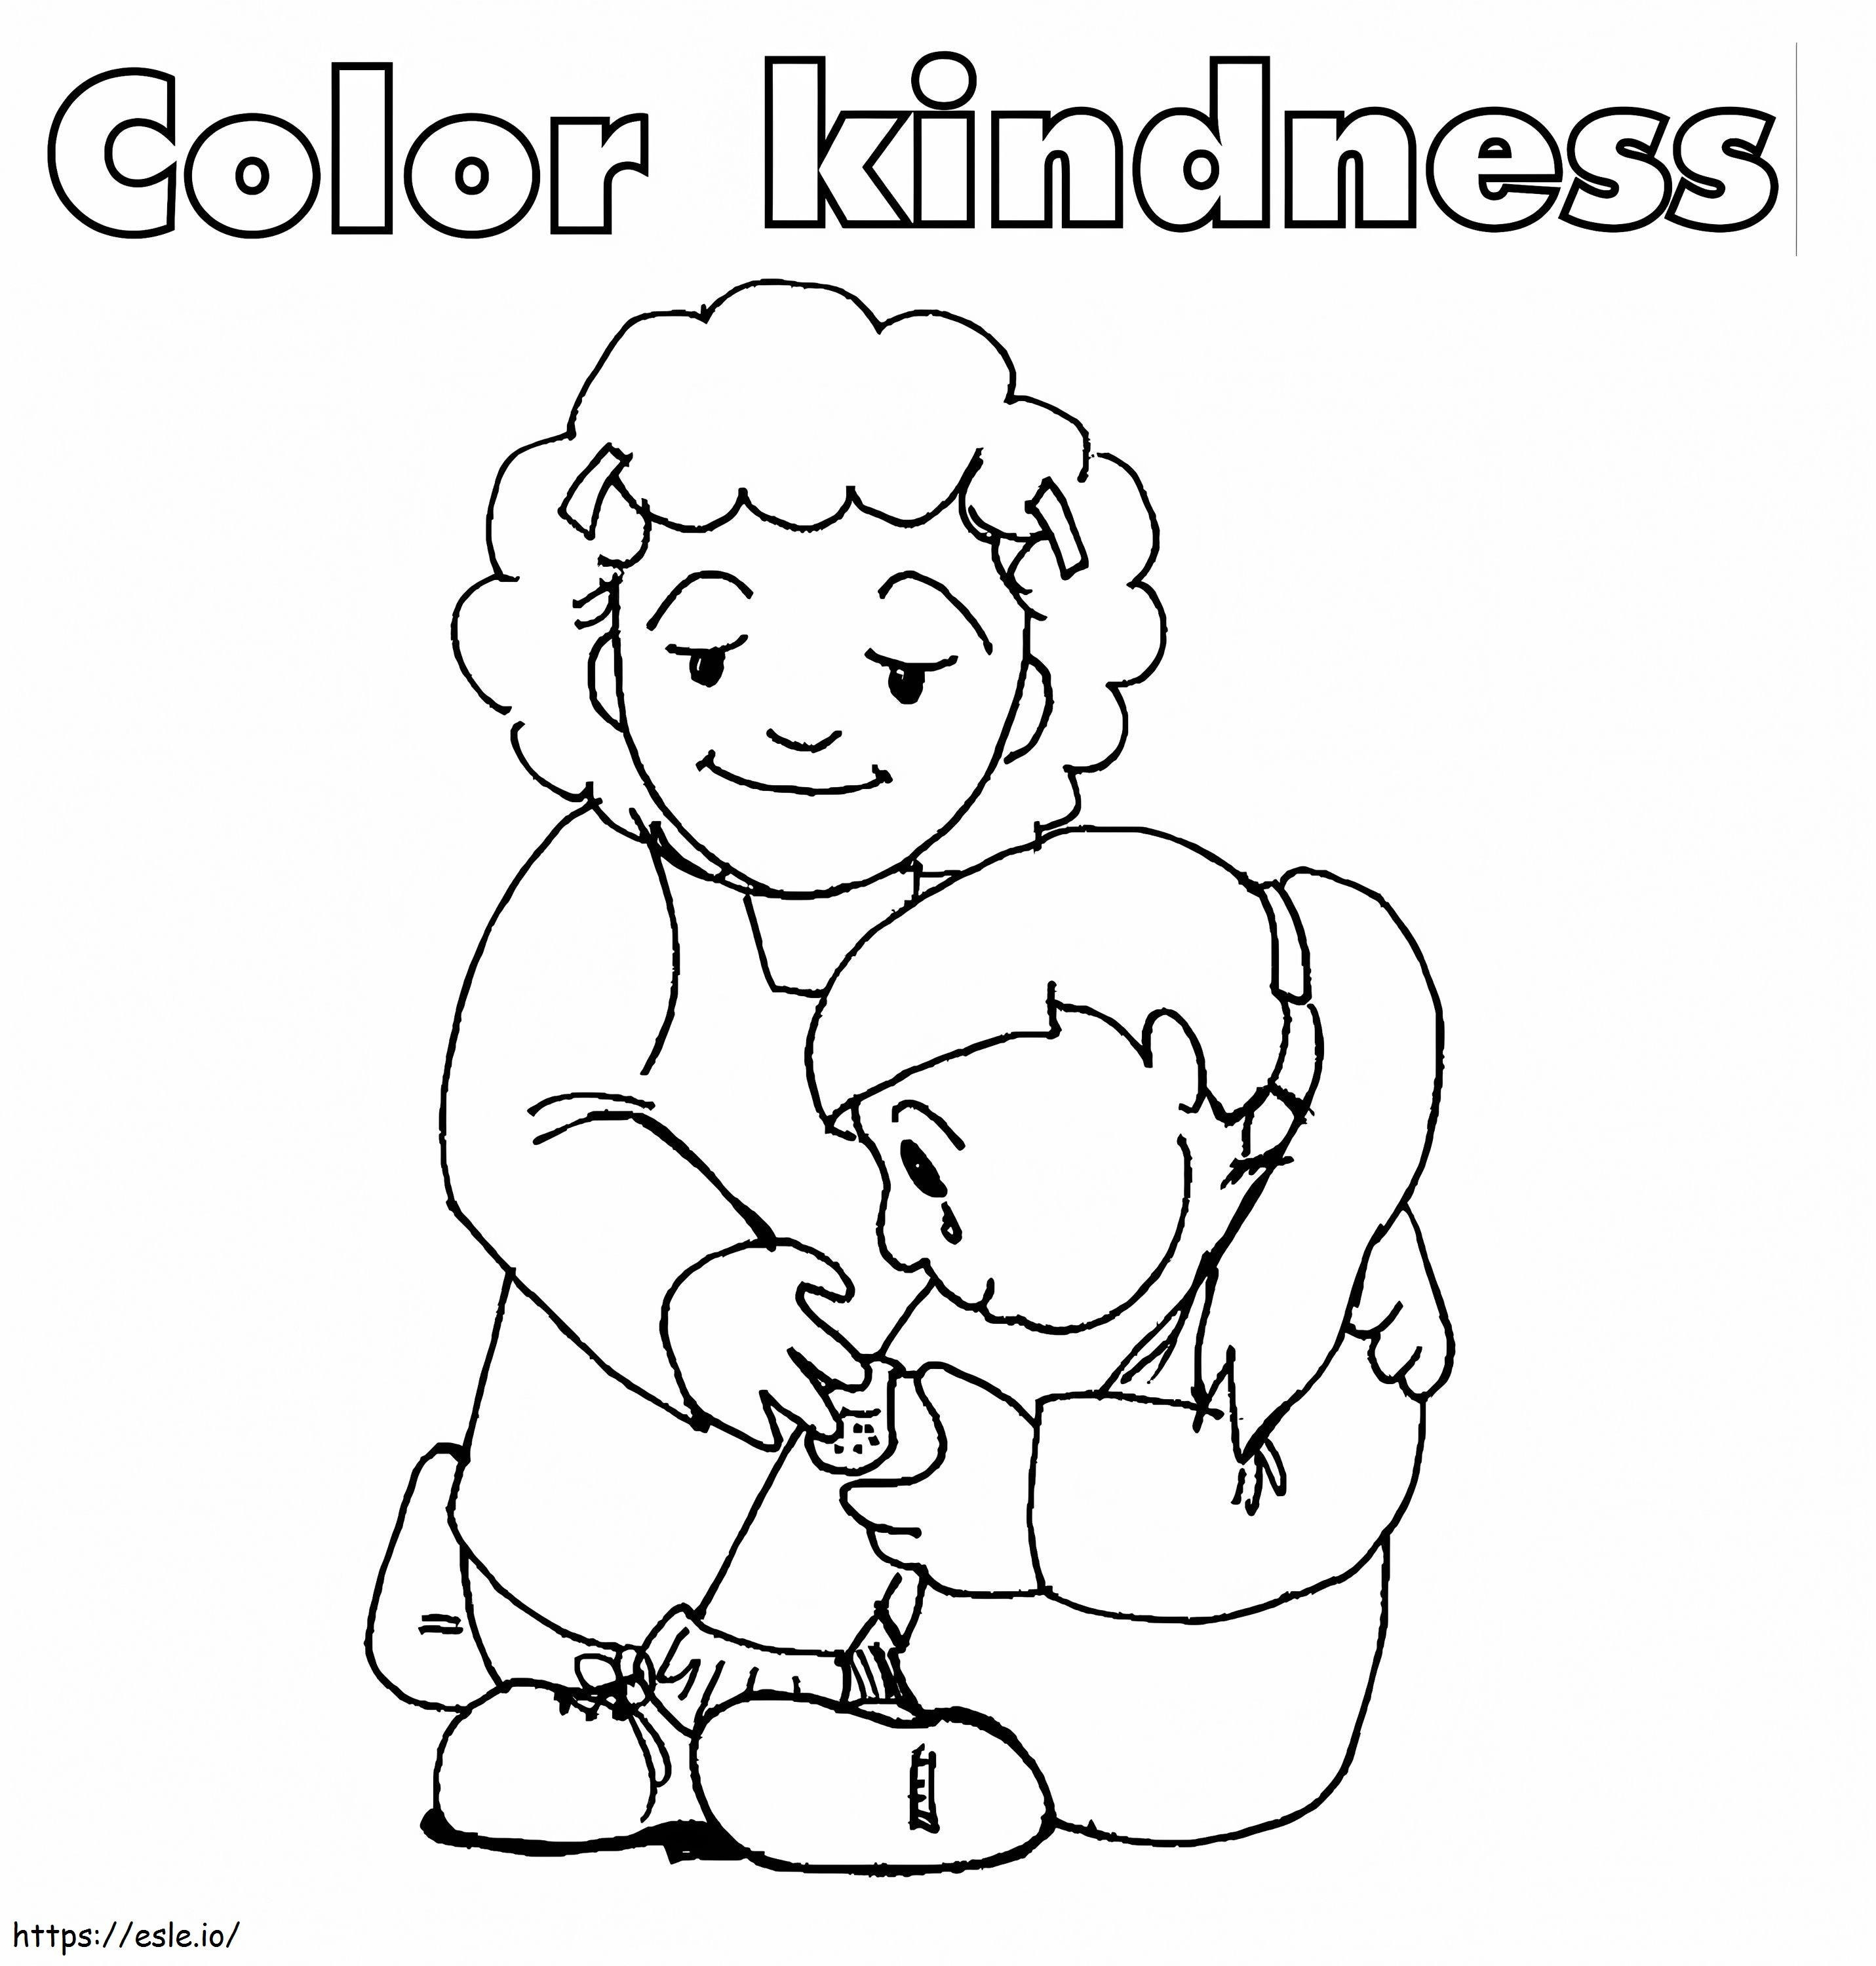 Showing Kindness Toward Others coloring page